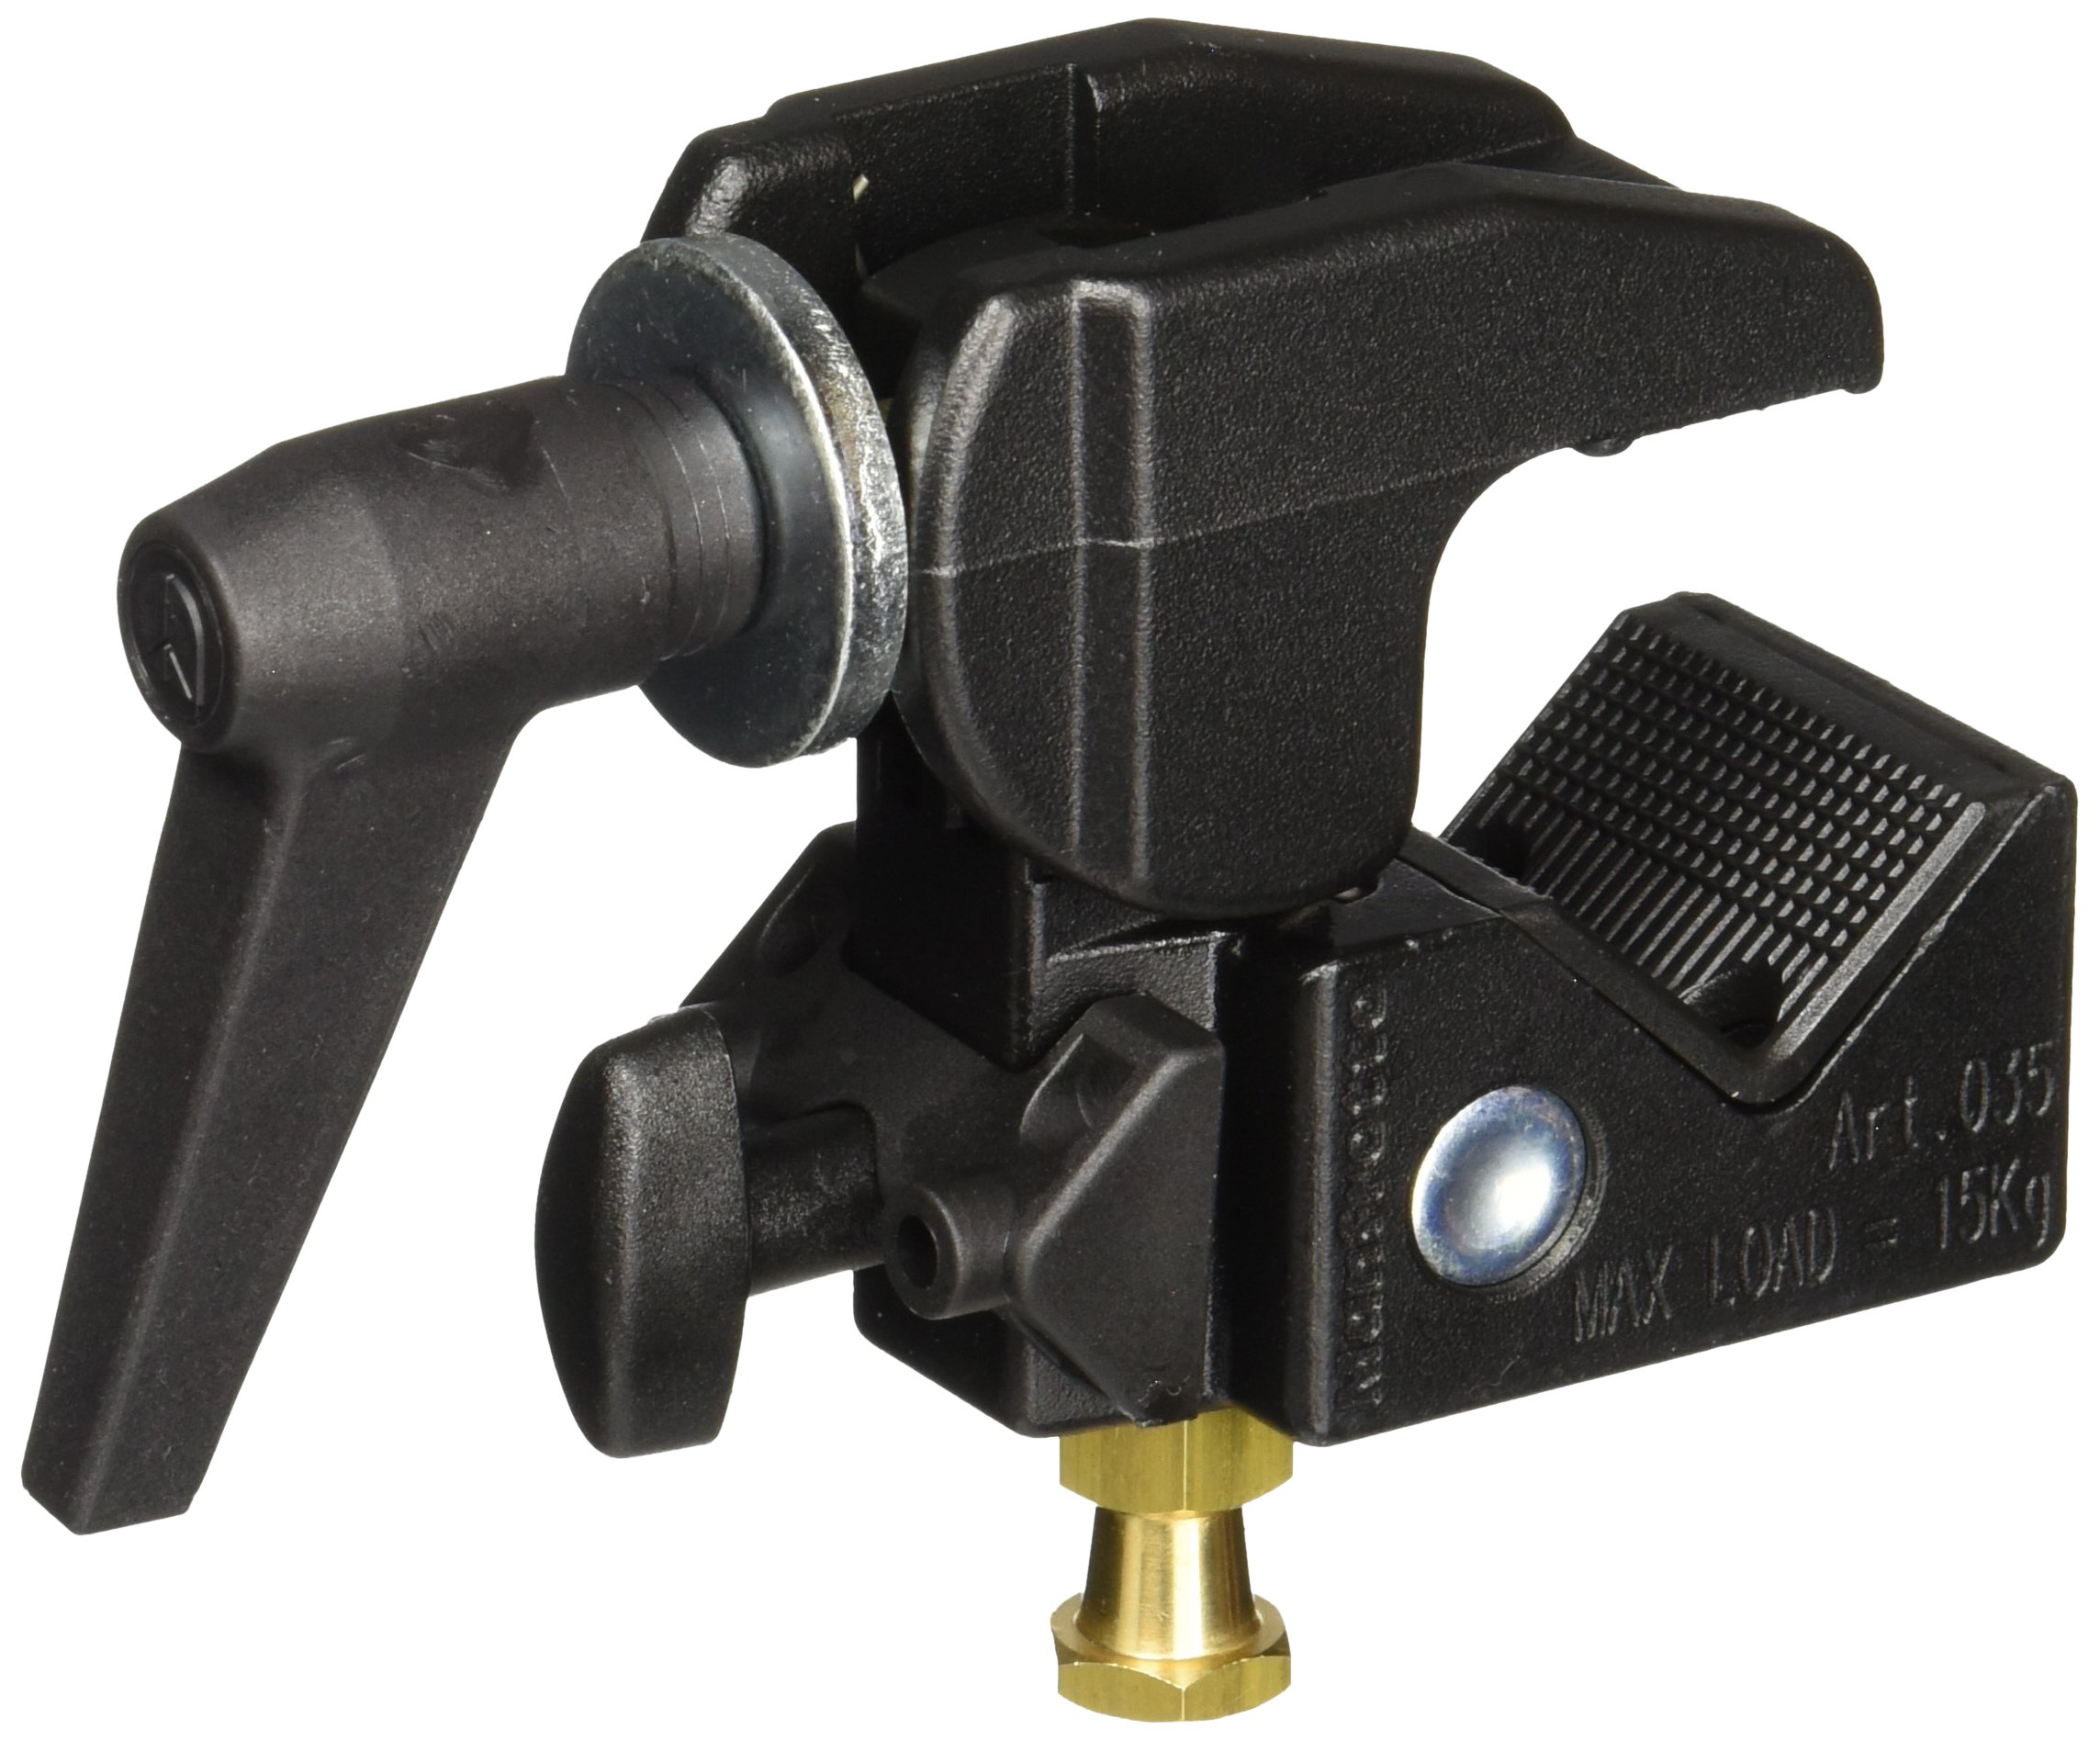 Manfrotto 244RC Variable Friction Magic Arm Quick Release (Black) & 035RL Super Clamp with 2908 Standard Stud - Replaces 2900 - Black